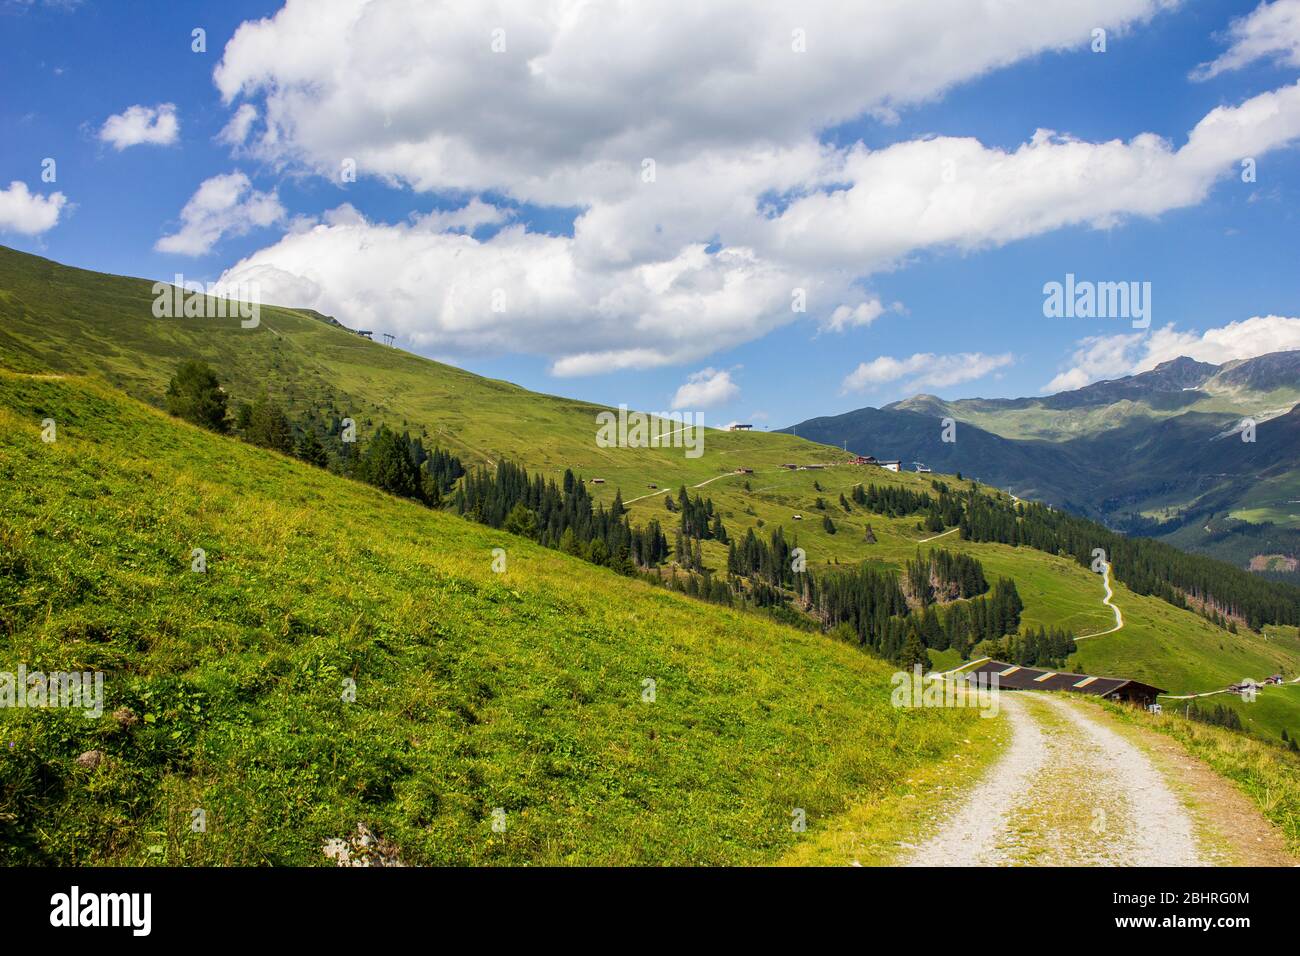 Hiking Trail in the Mountains above Tux, Tyrol Stock Photo